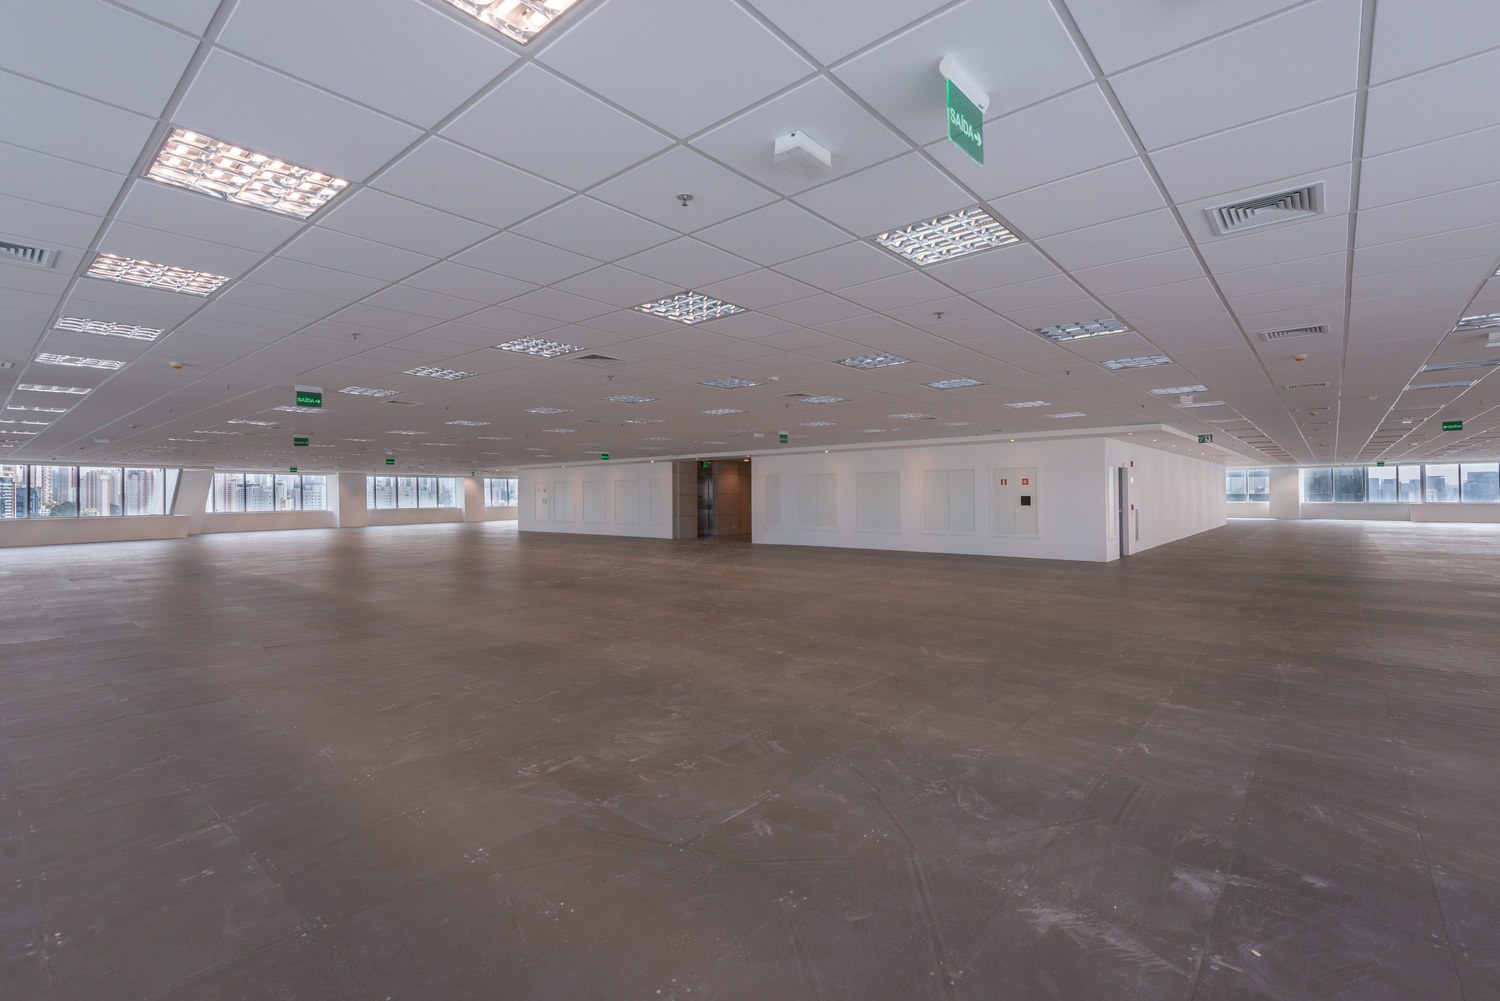 A large empty room with white ceiling panels and walls that has windows lining the sides.